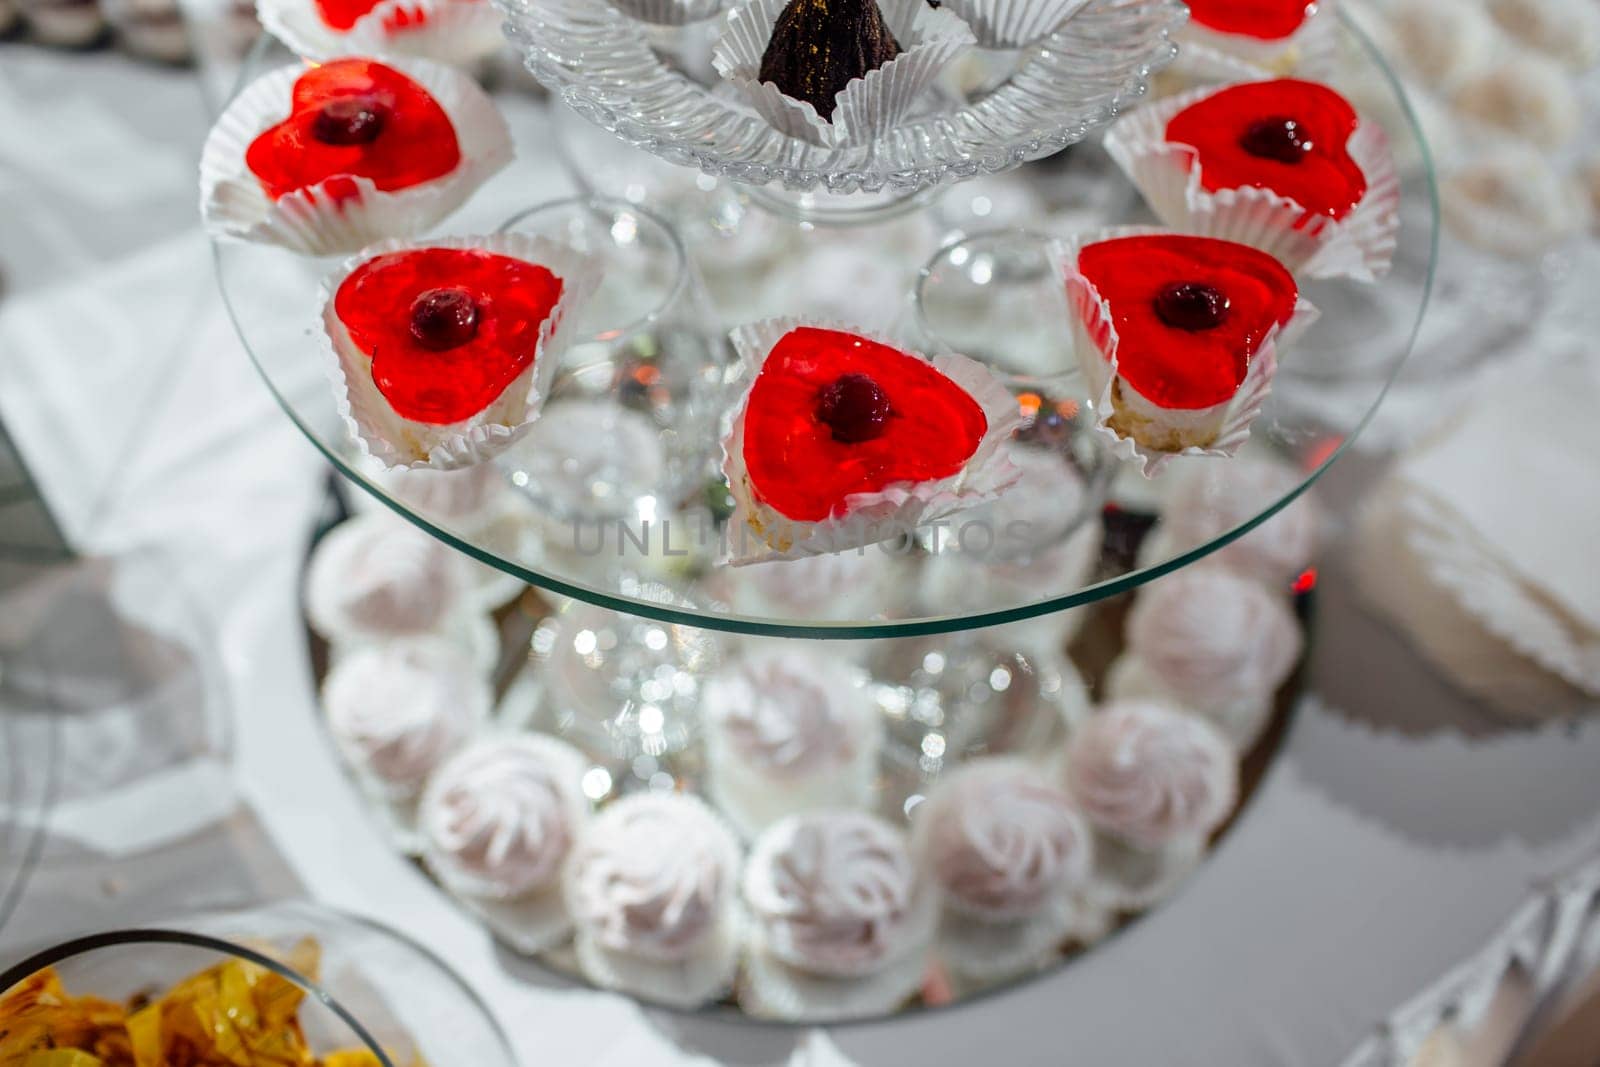 delicious candy bar at luxury wedding reception. exclusive expensive catering. table with modern desserts, cupcakes, sweets with fruits. baby or bridal shower. holiday celebration. selective focus